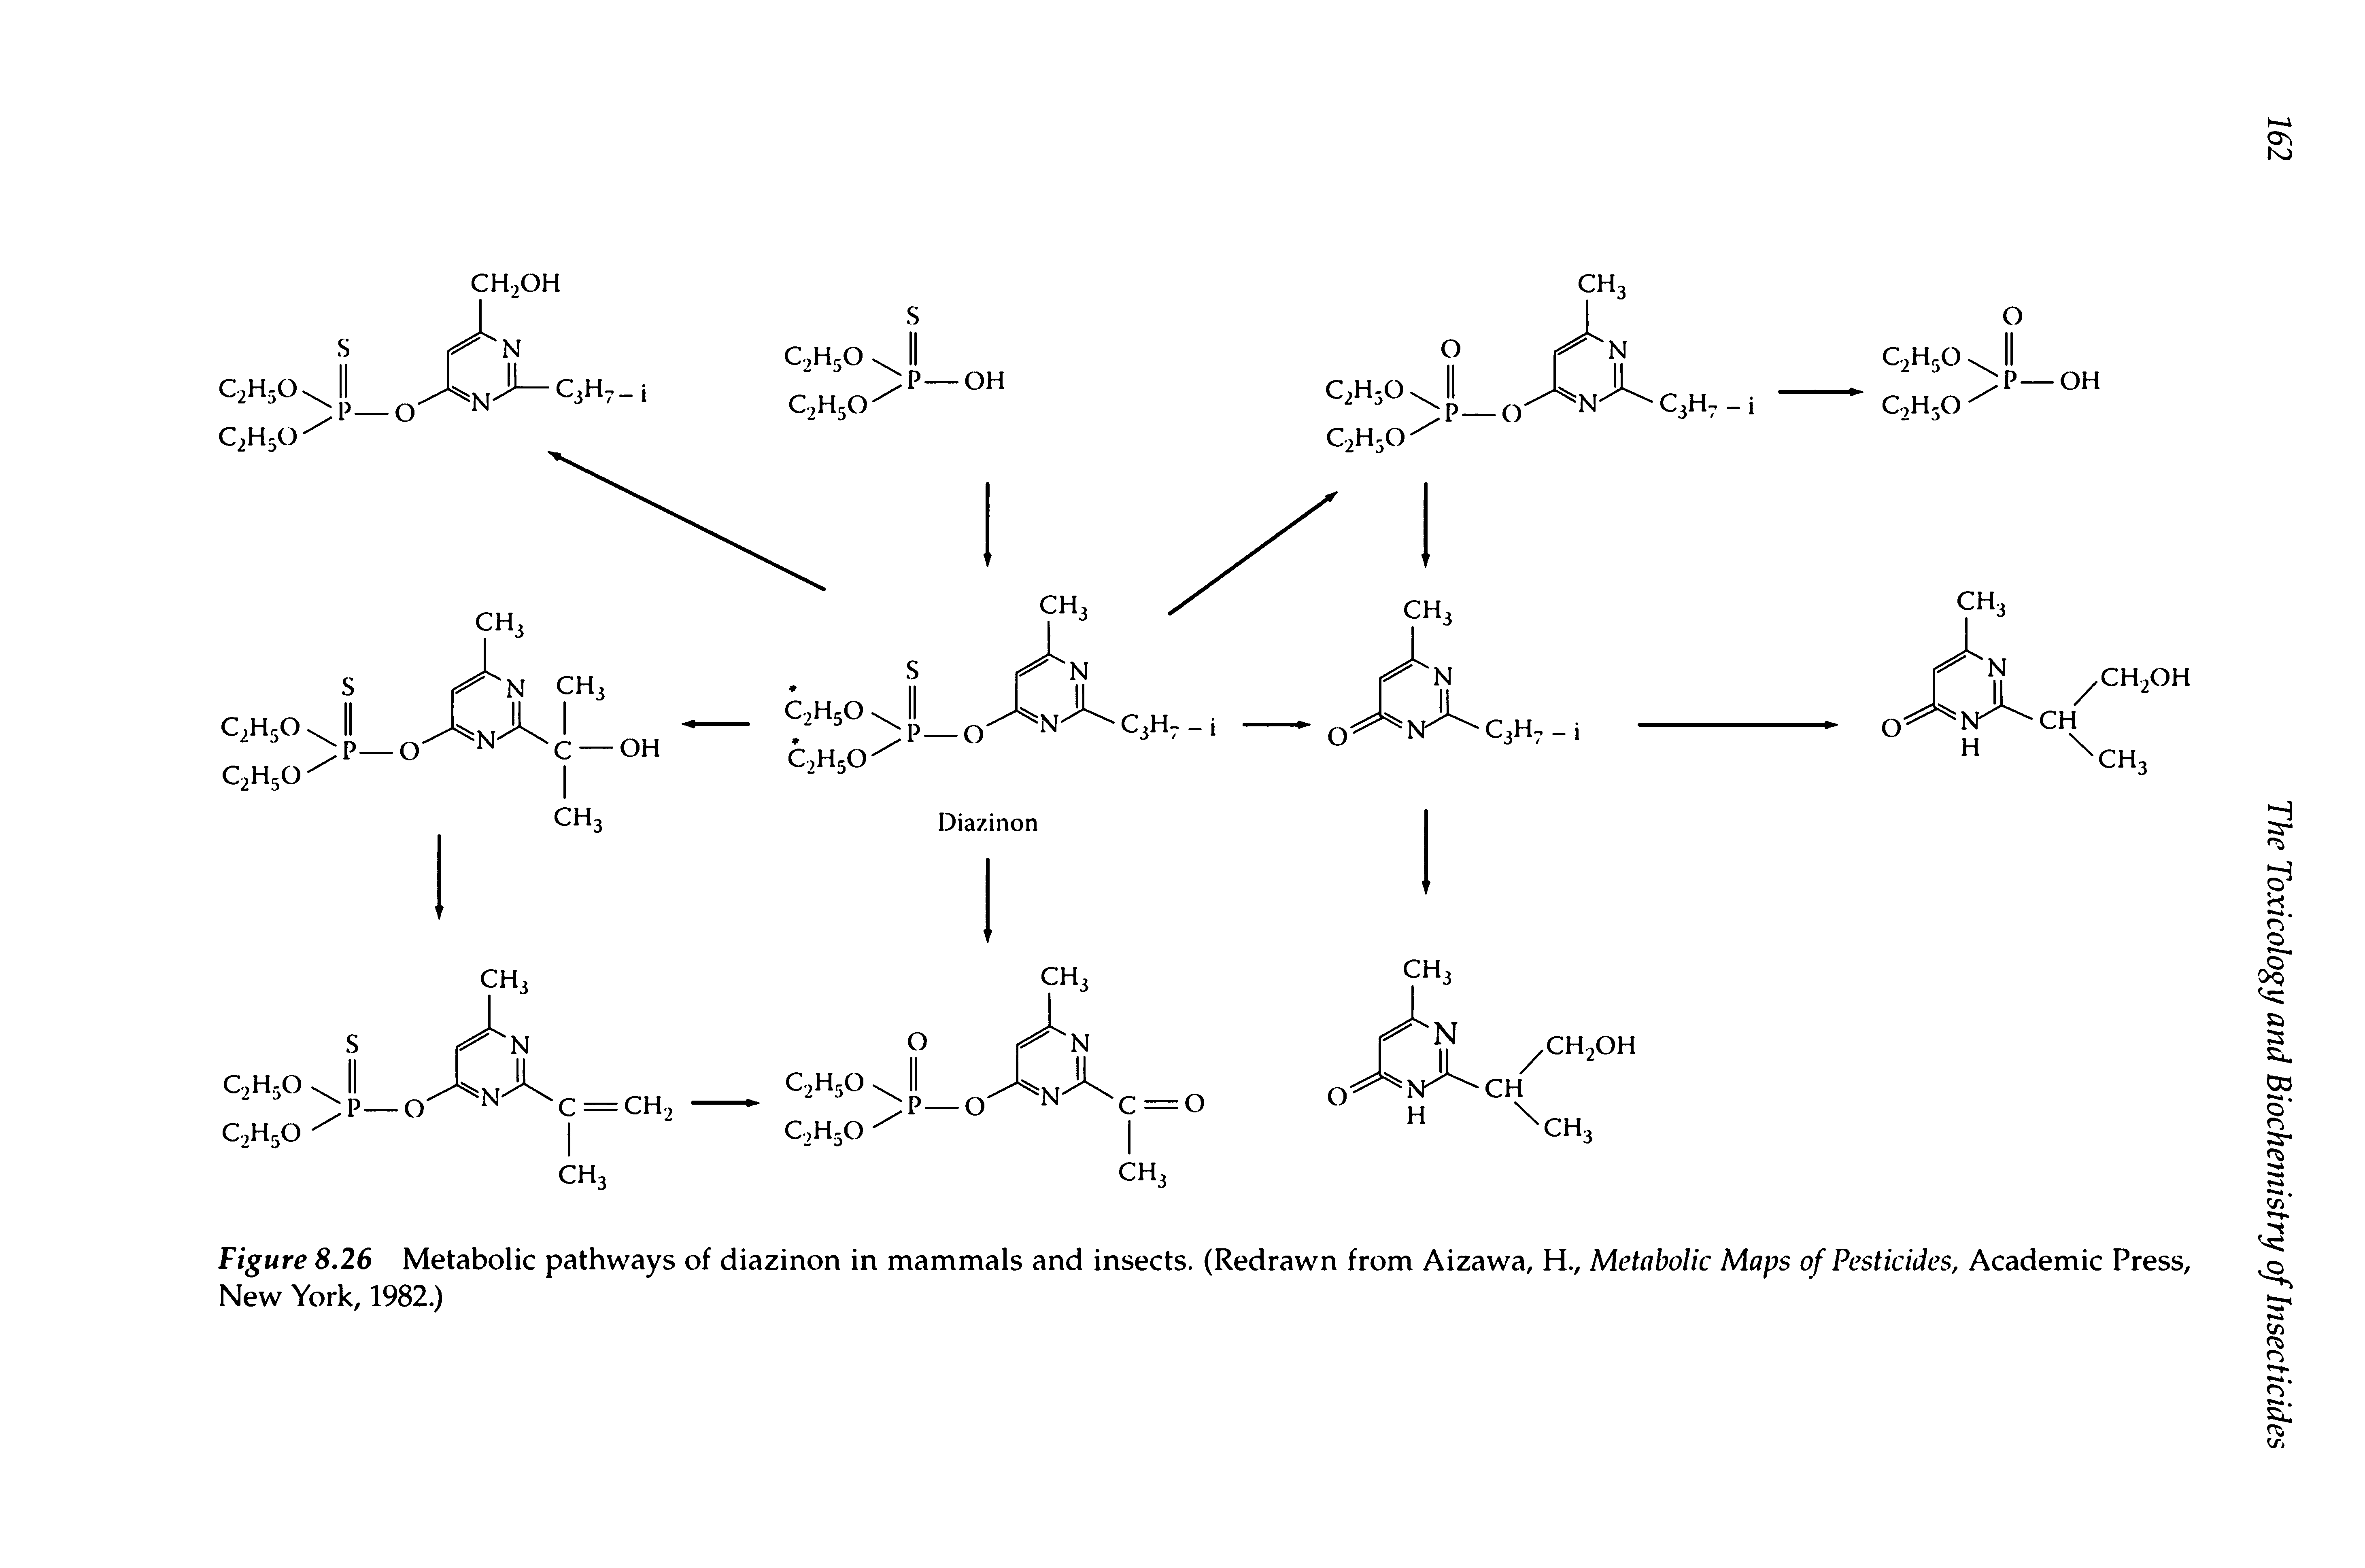 Figure 8.26 Metabolic pathways of diazinon in mammals and insects. (Redrawn from Aizawa, H., Metabolic Maps of Pesticides, Academic Press, New York, 1982.)...